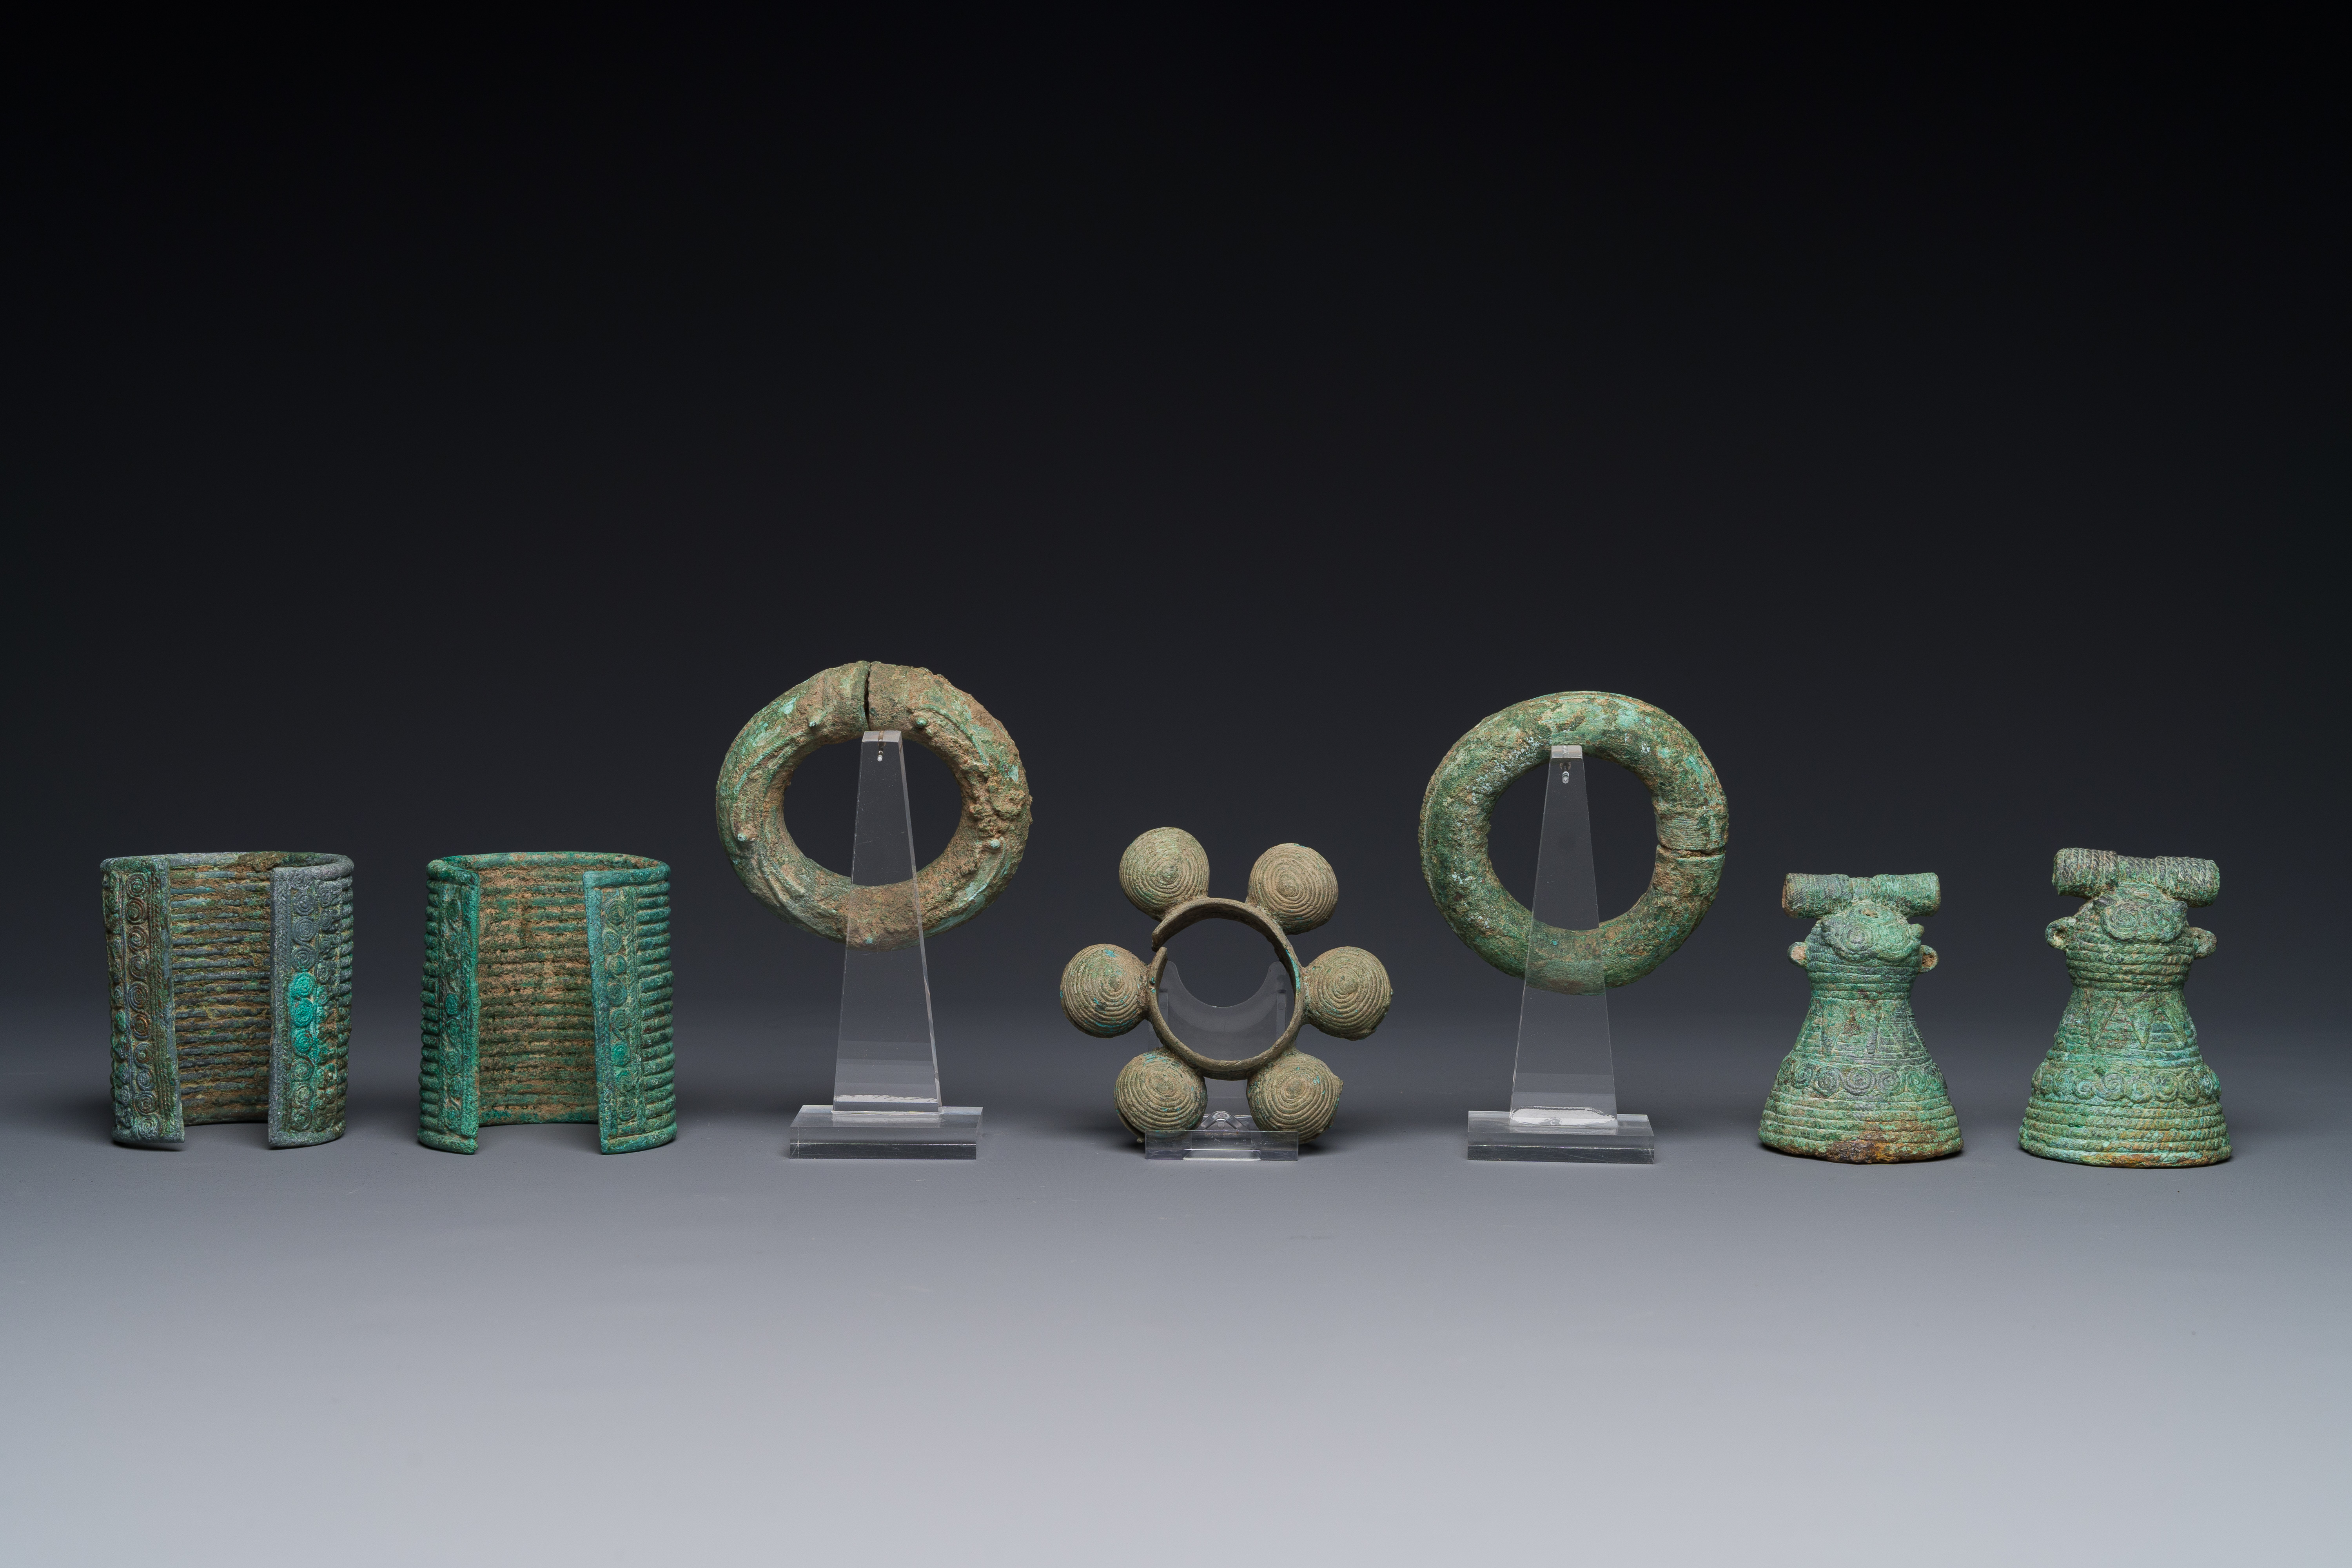 A collection of bronze bracelets and animal bells, Vietnam and Cambodia, 4th/1st C. B.C - Image 6 of 18